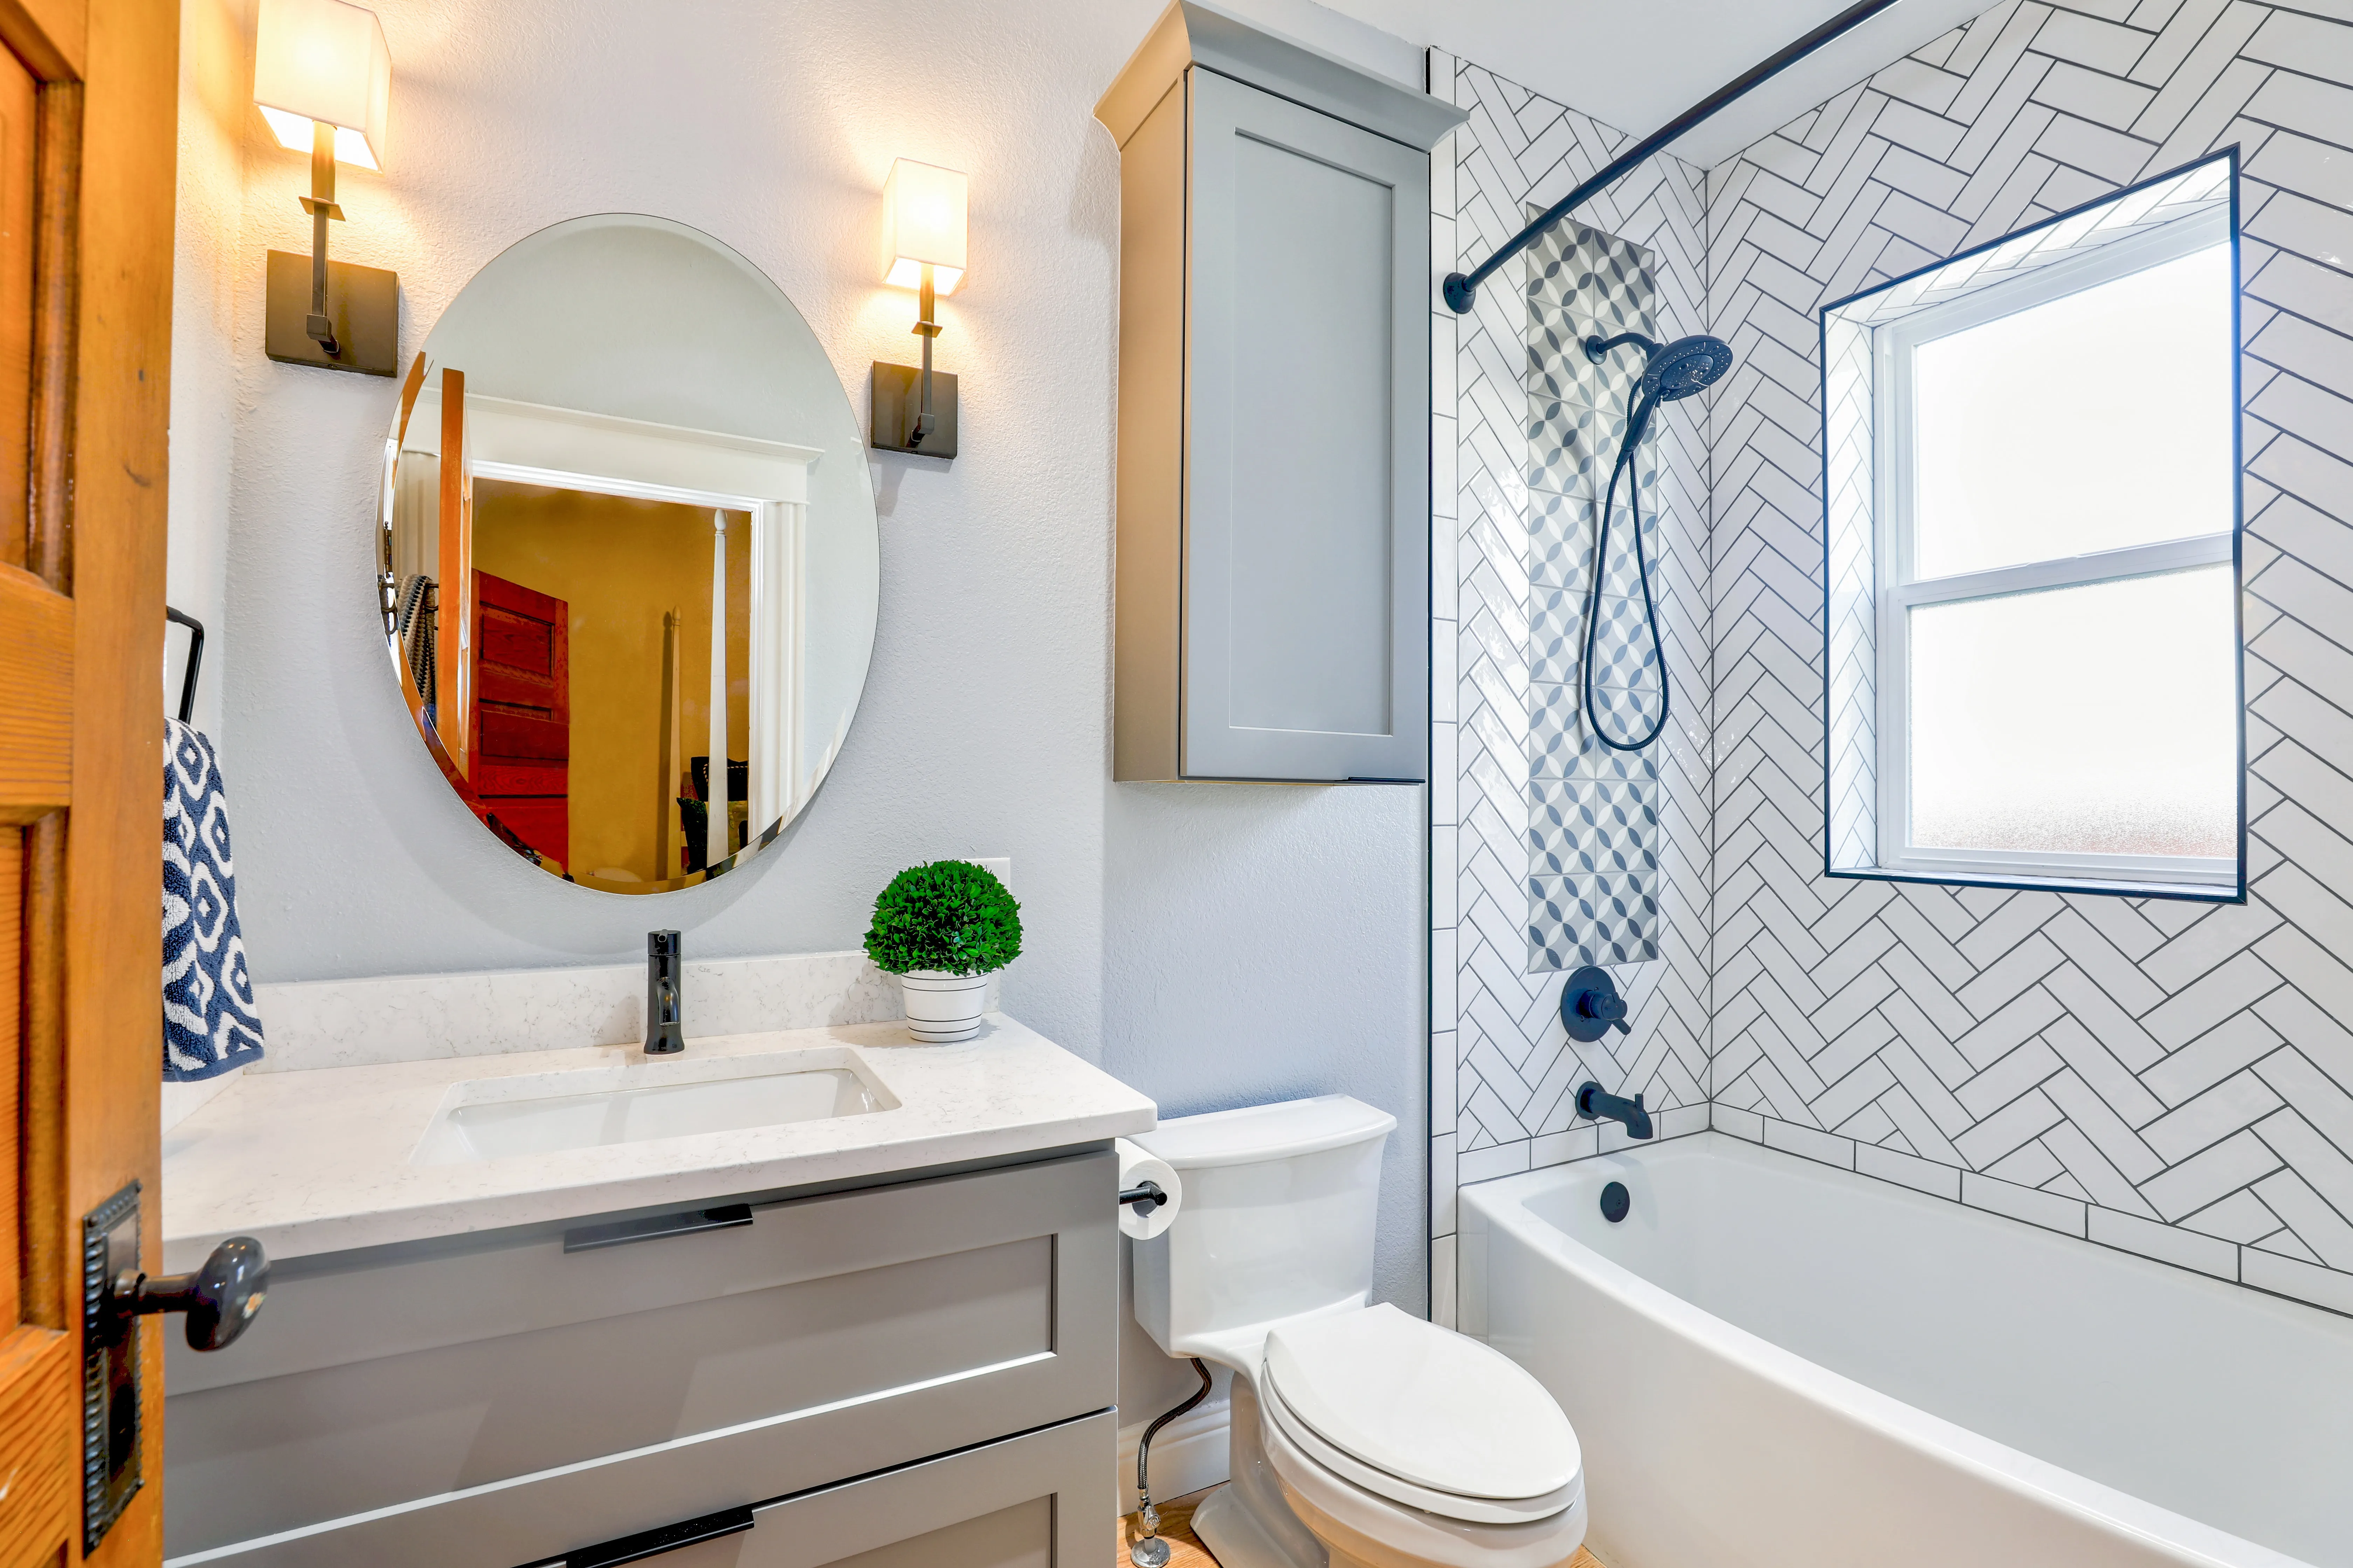 If you want to modernize your bathroom, we'll help you pick the perfect materials and bring your vision to life. for Cardwell's Contracting in Bowling Green, KY